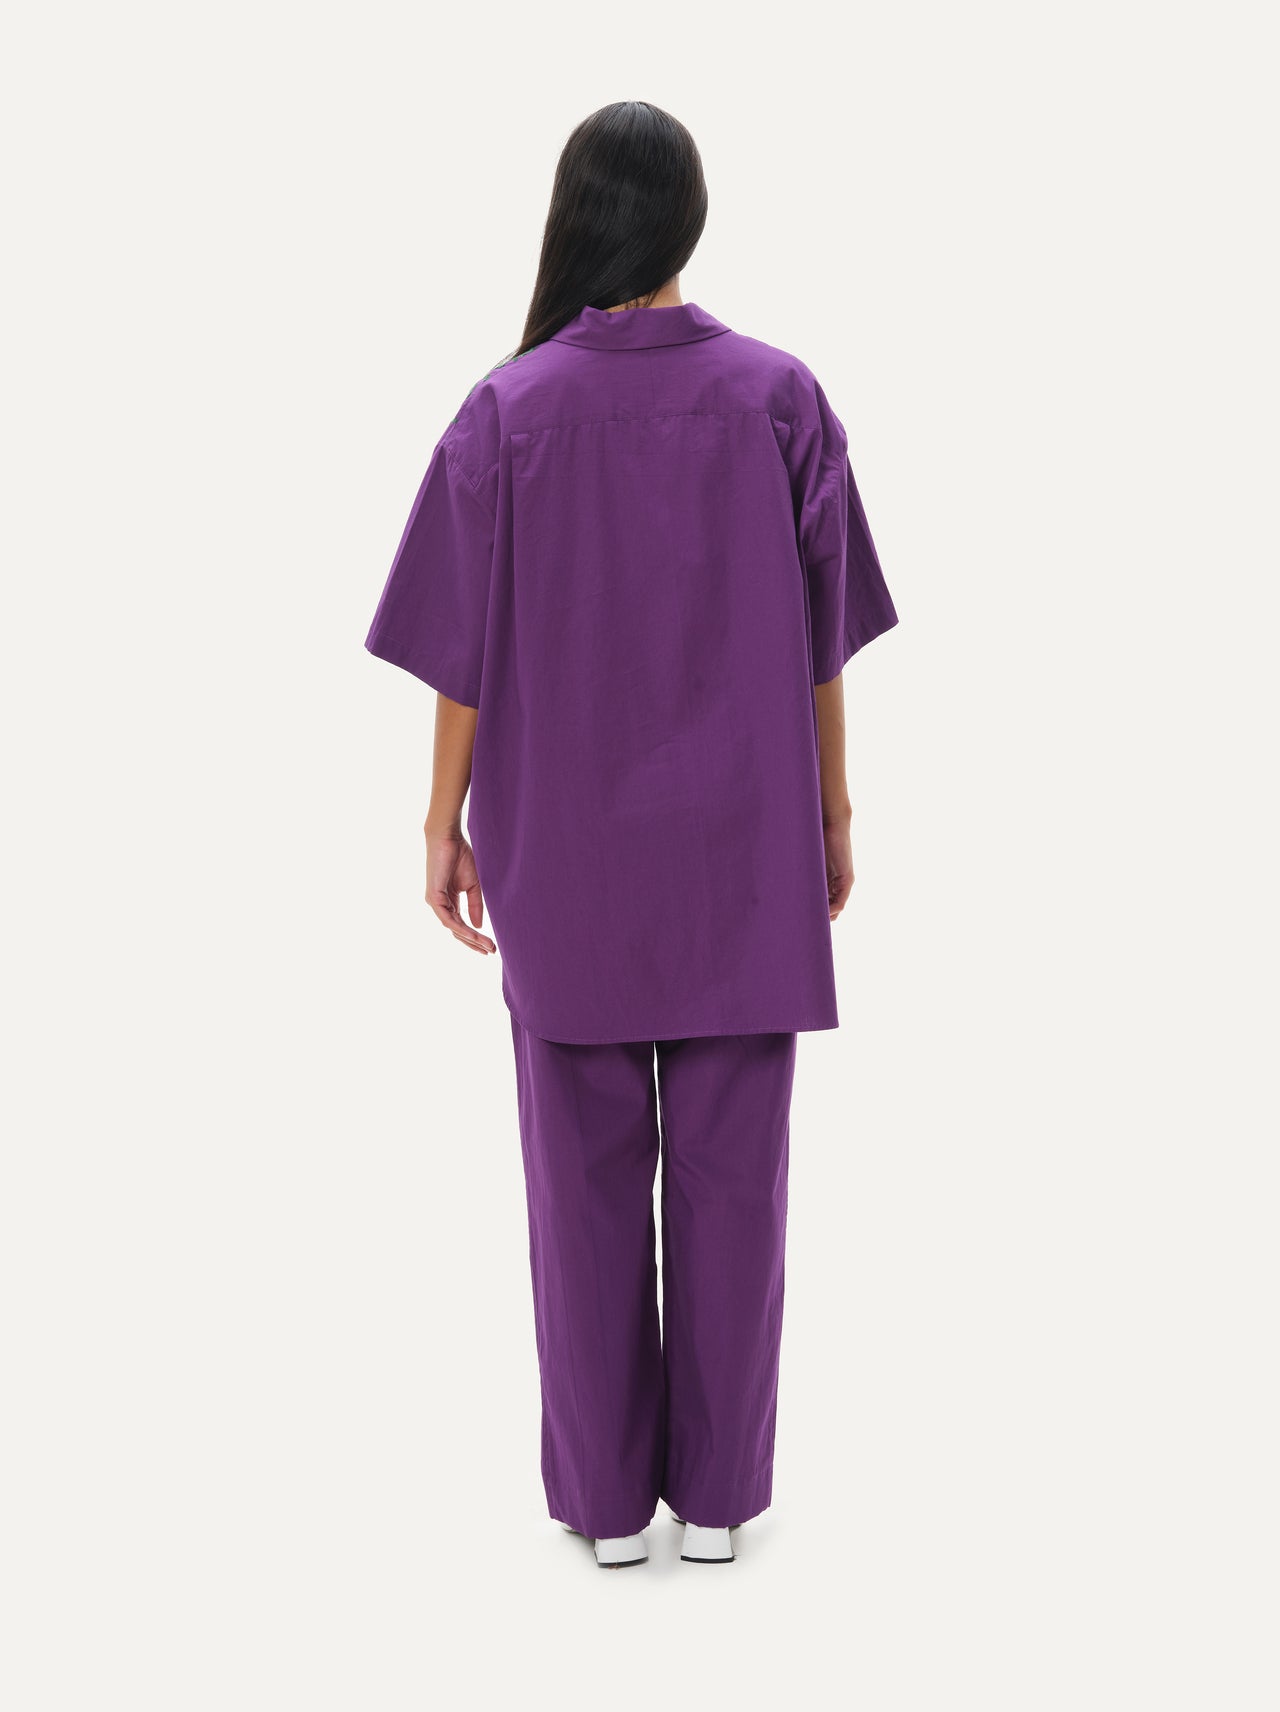 Embroidered co-ord - Grape